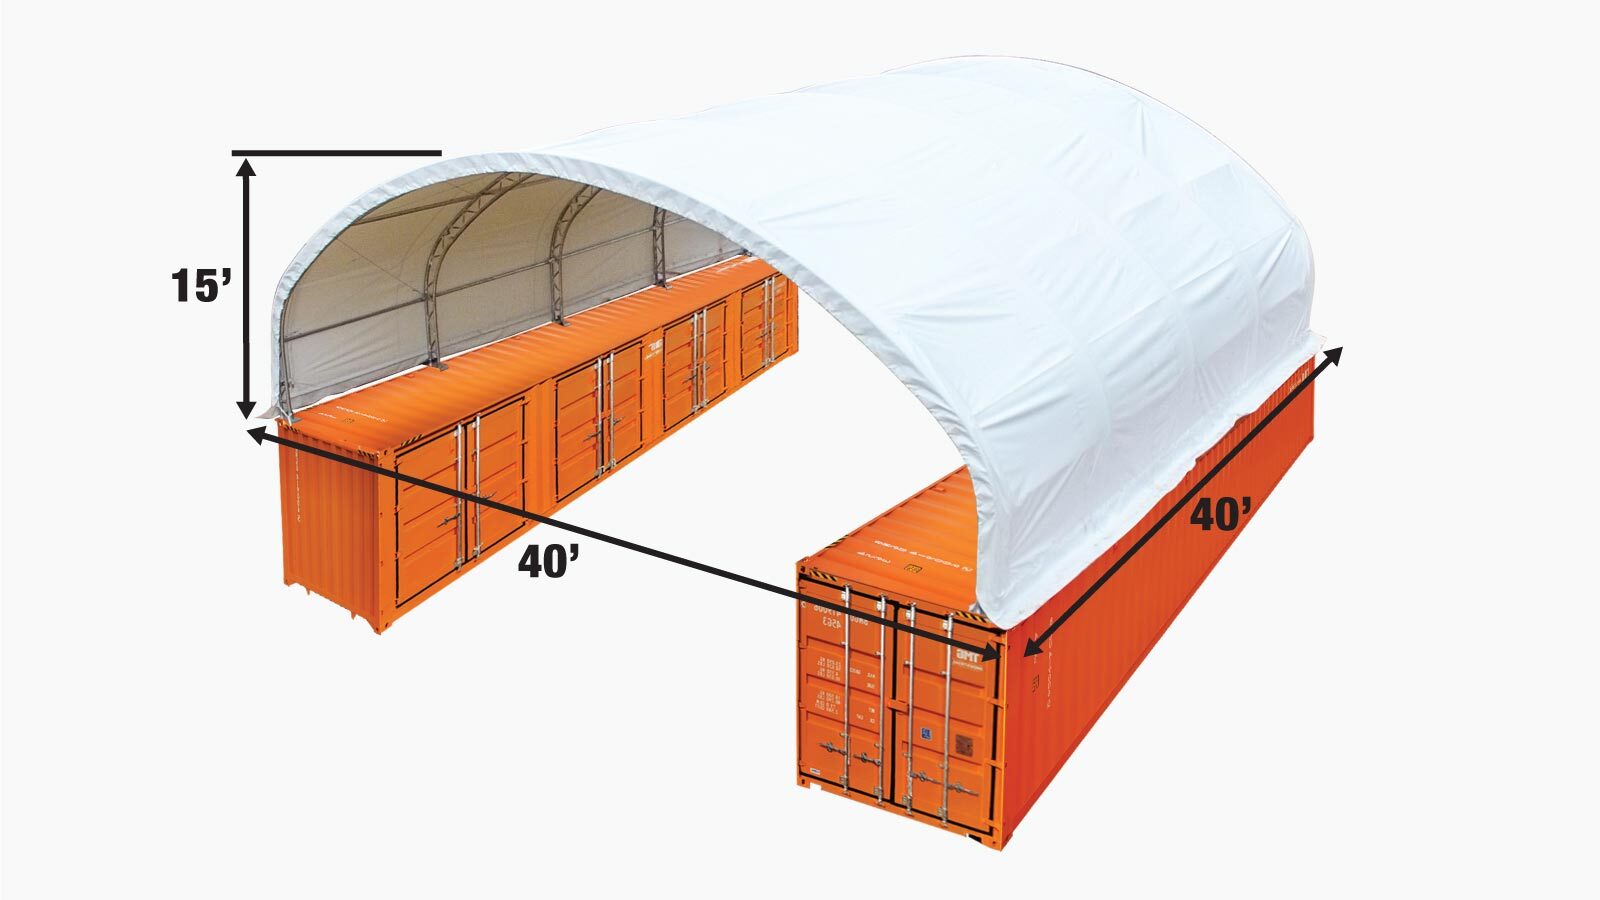 TMG Industrial 40' x 40' Dual Truss Container Shelter with Heavy Duty 21 oz PVC Cover, TMG-DT4041C (Previously DT4040C)-specifications-image